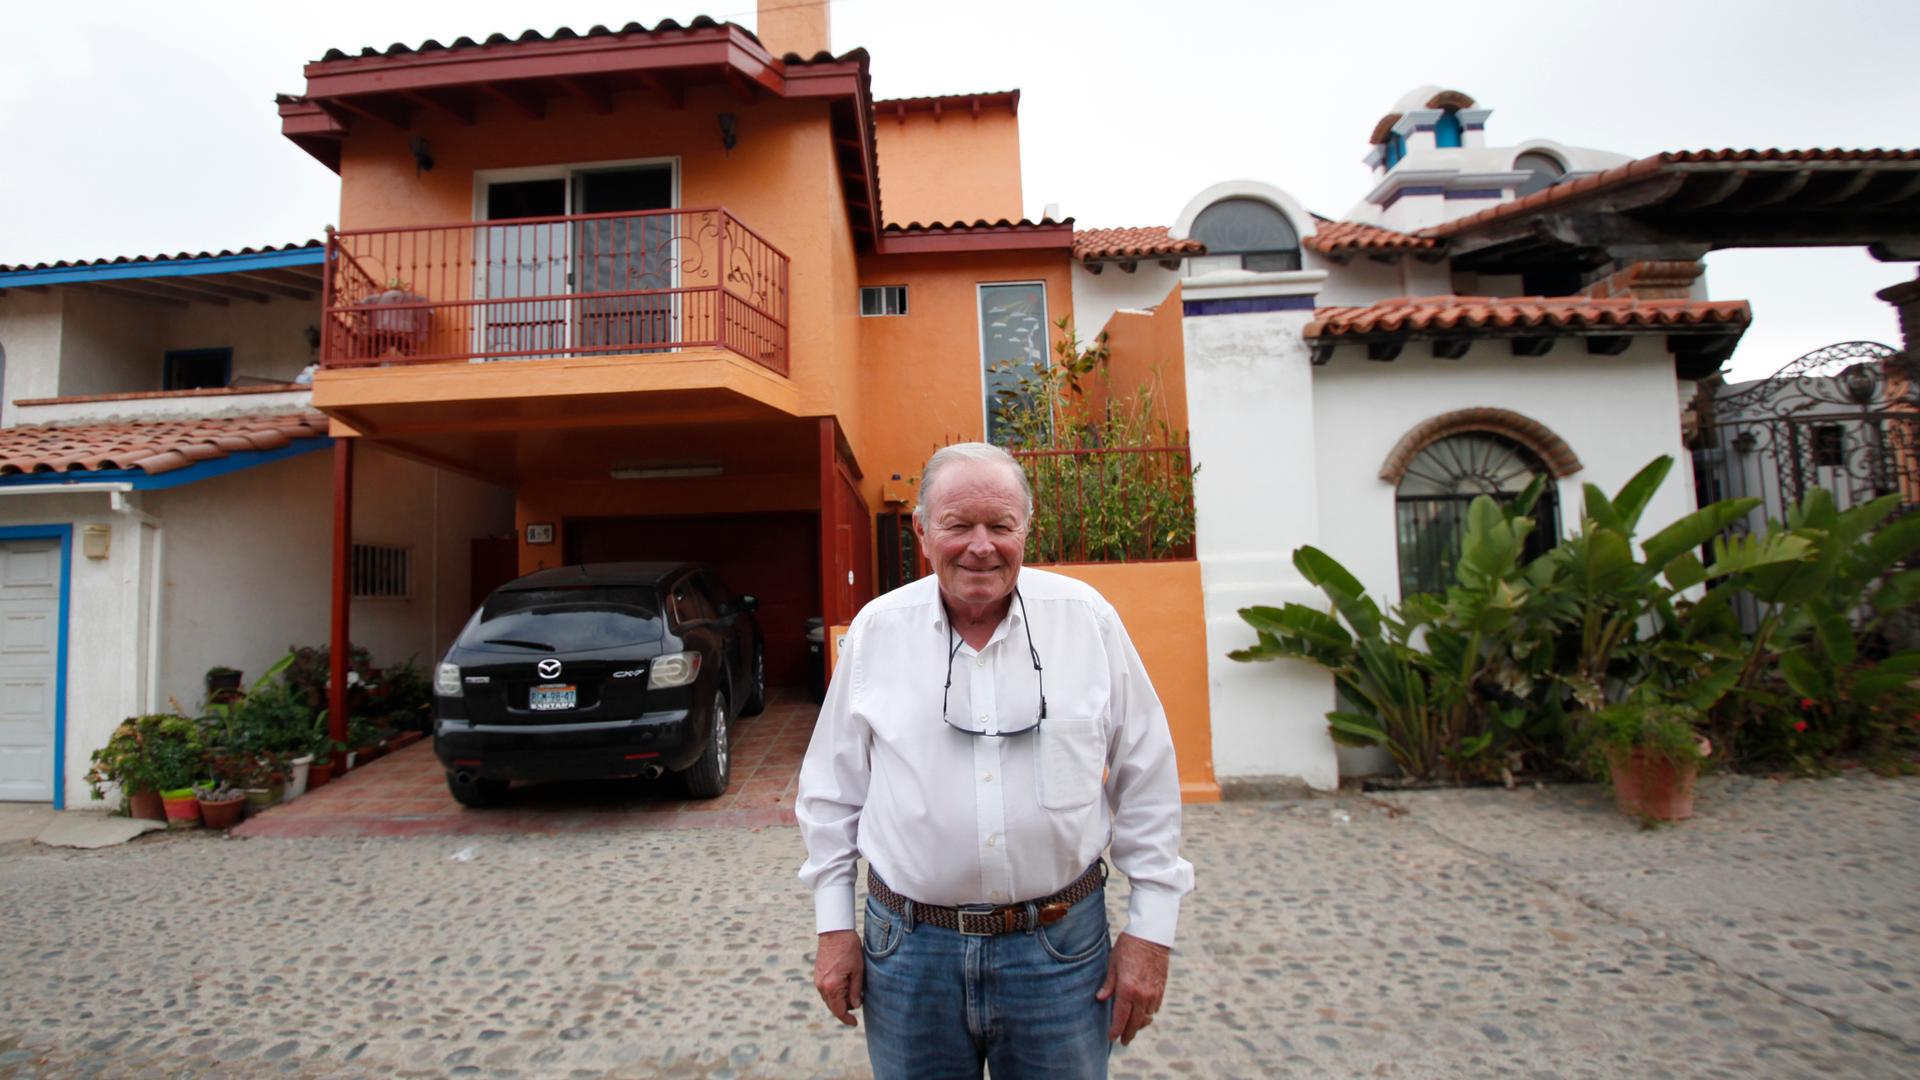 Gil Devine in front of his home in Mexico, near the border.  Devine commutes to work six days a week in San Diego.  